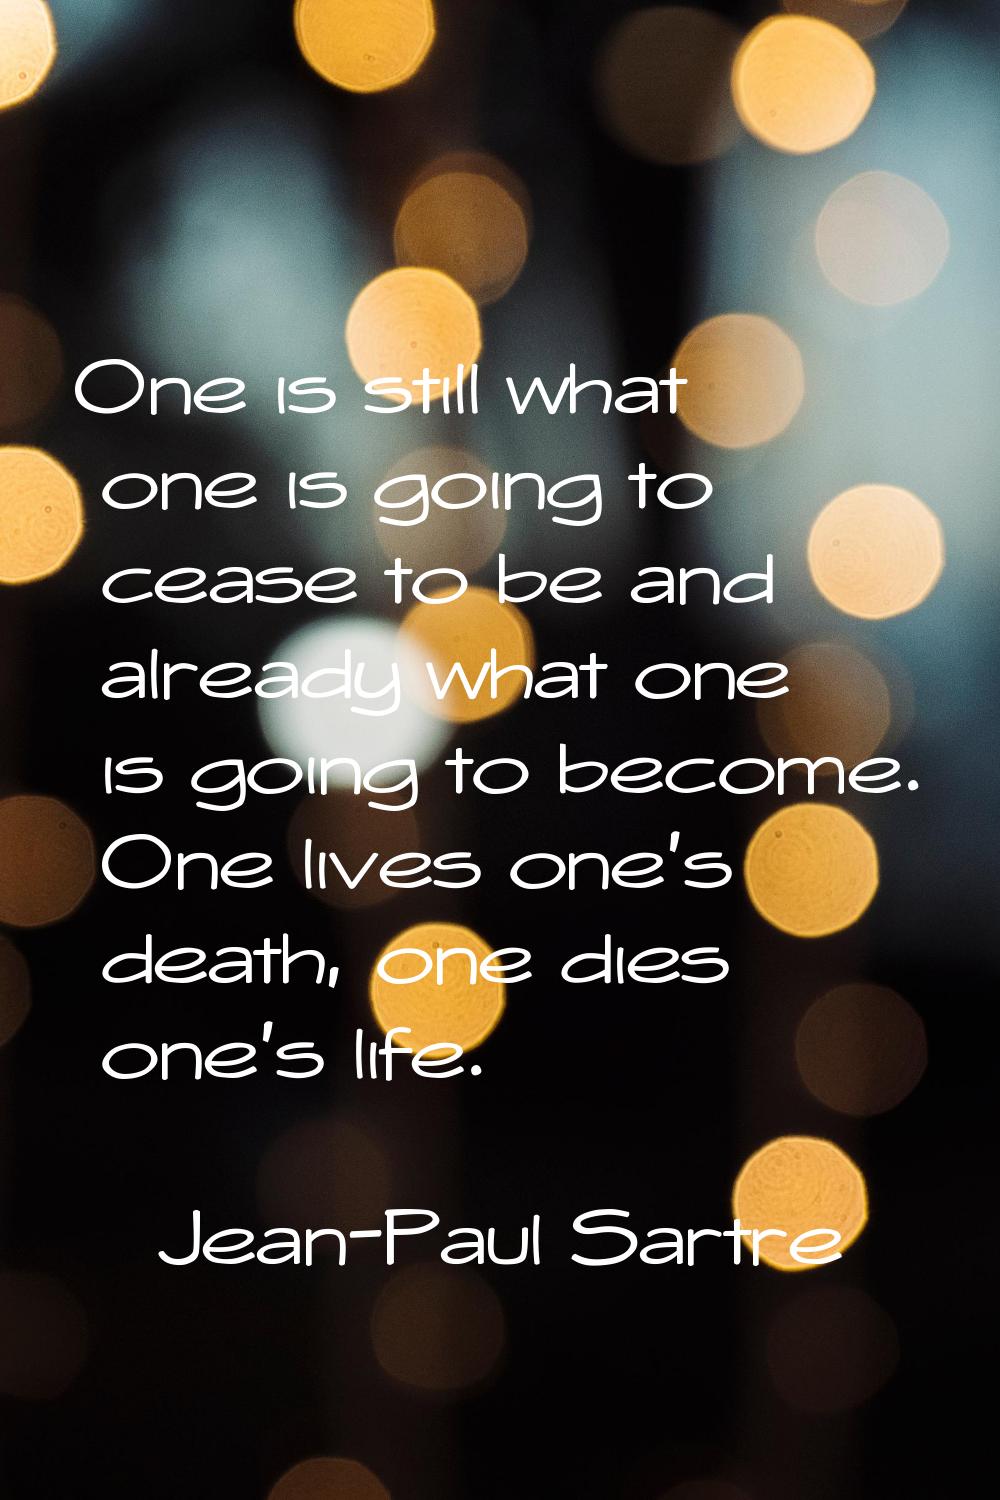 One is still what one is going to cease to be and already what one is going to become. One lives on